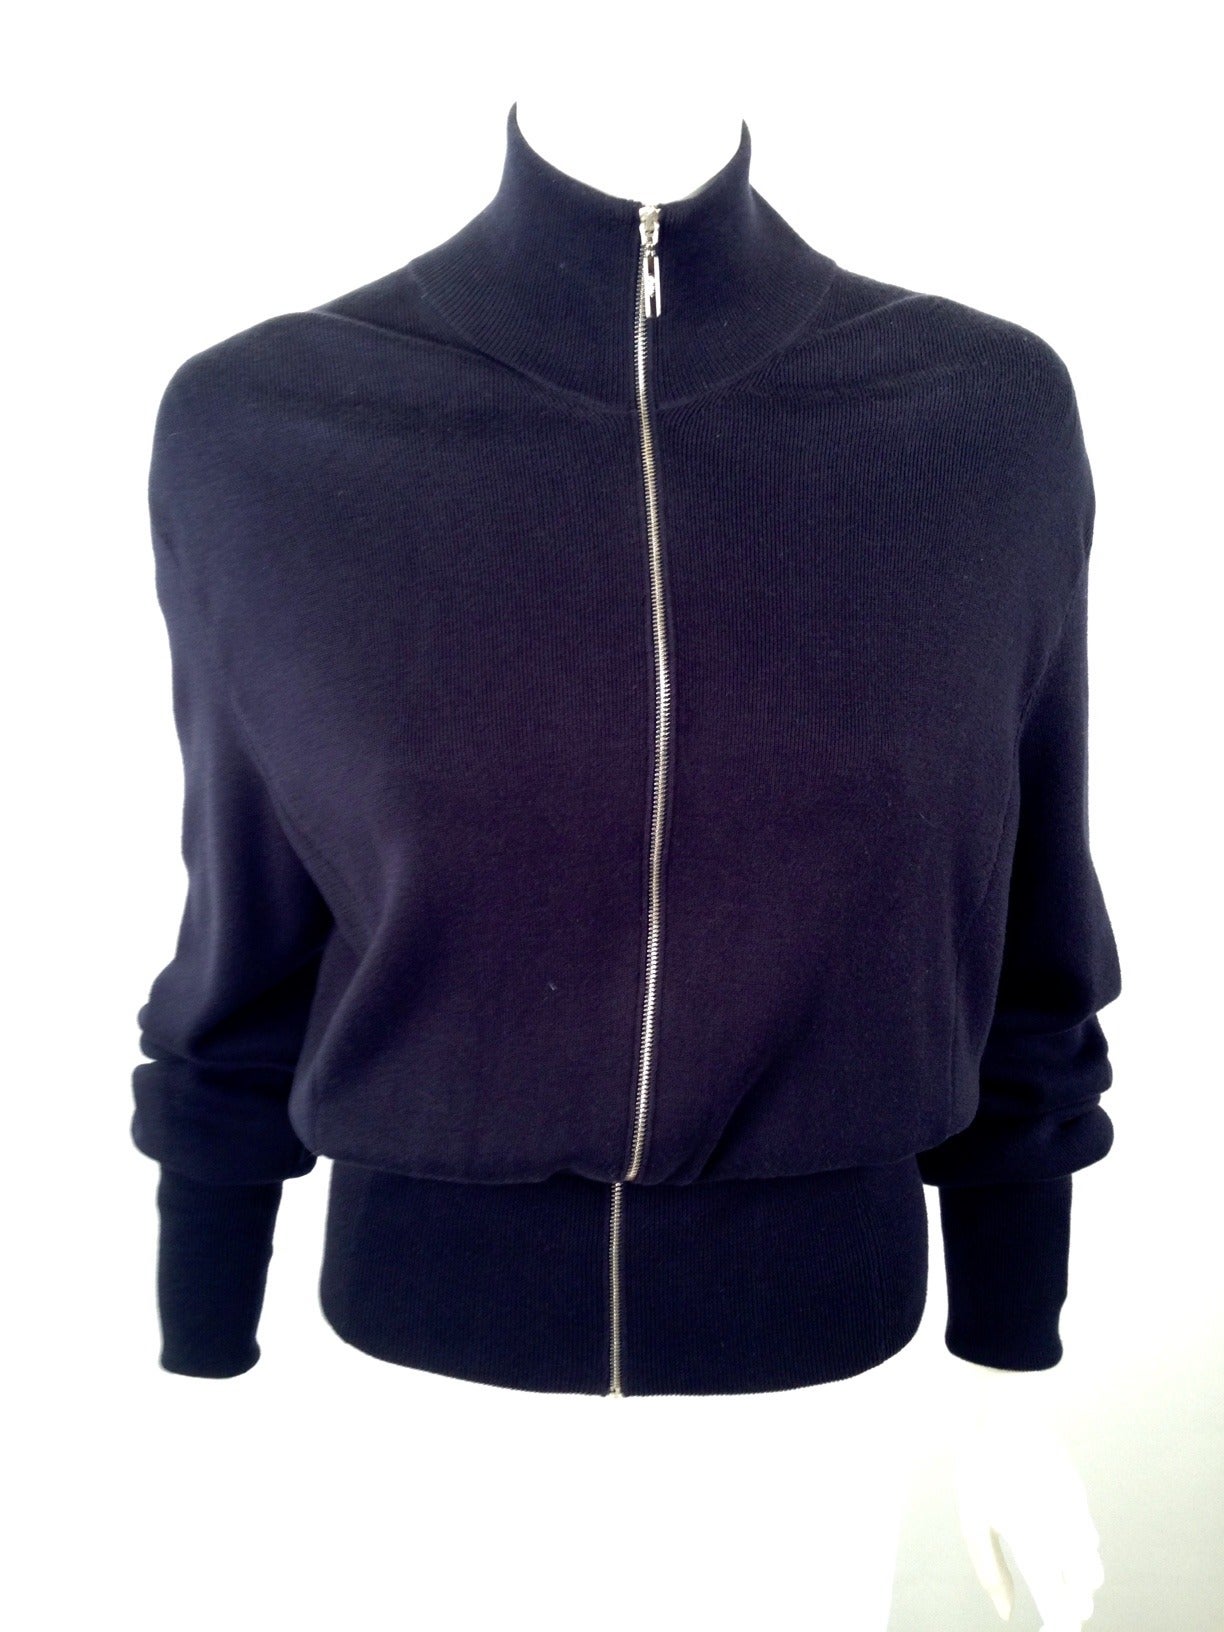 Women's Brand New Brioni Navy Cardigan With Zipper and Silk Lining For Sale